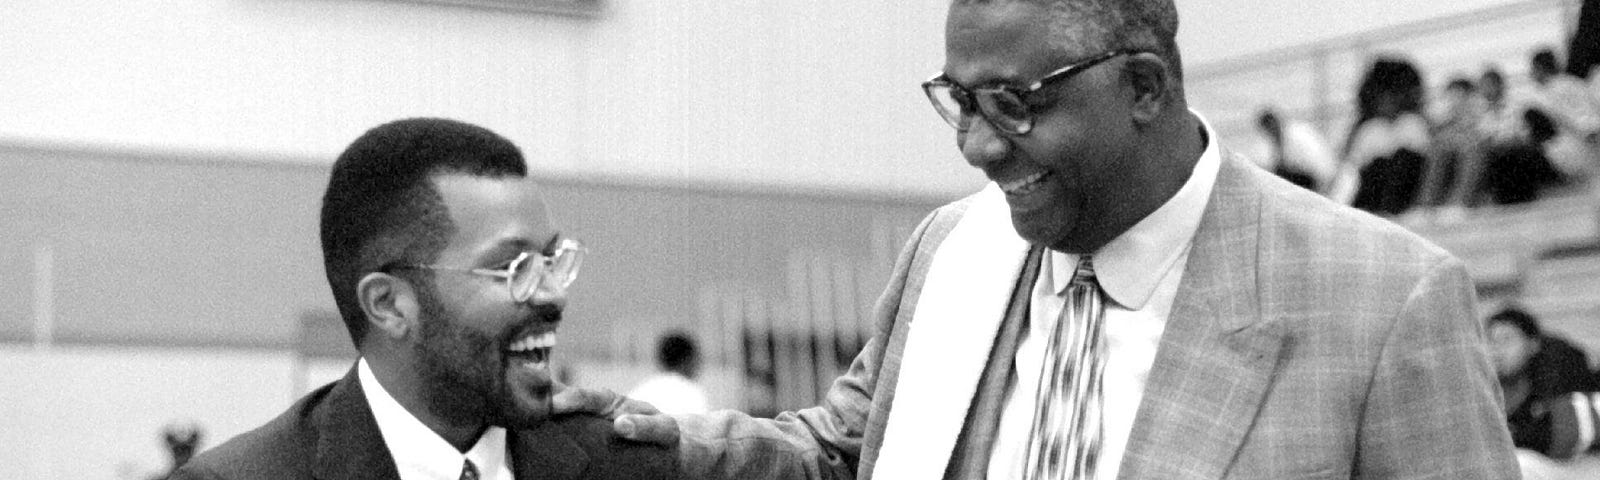 Coach Horace Broadnax (left) who played basketball for Georgetown meets with his old coach John Thompson before the game.